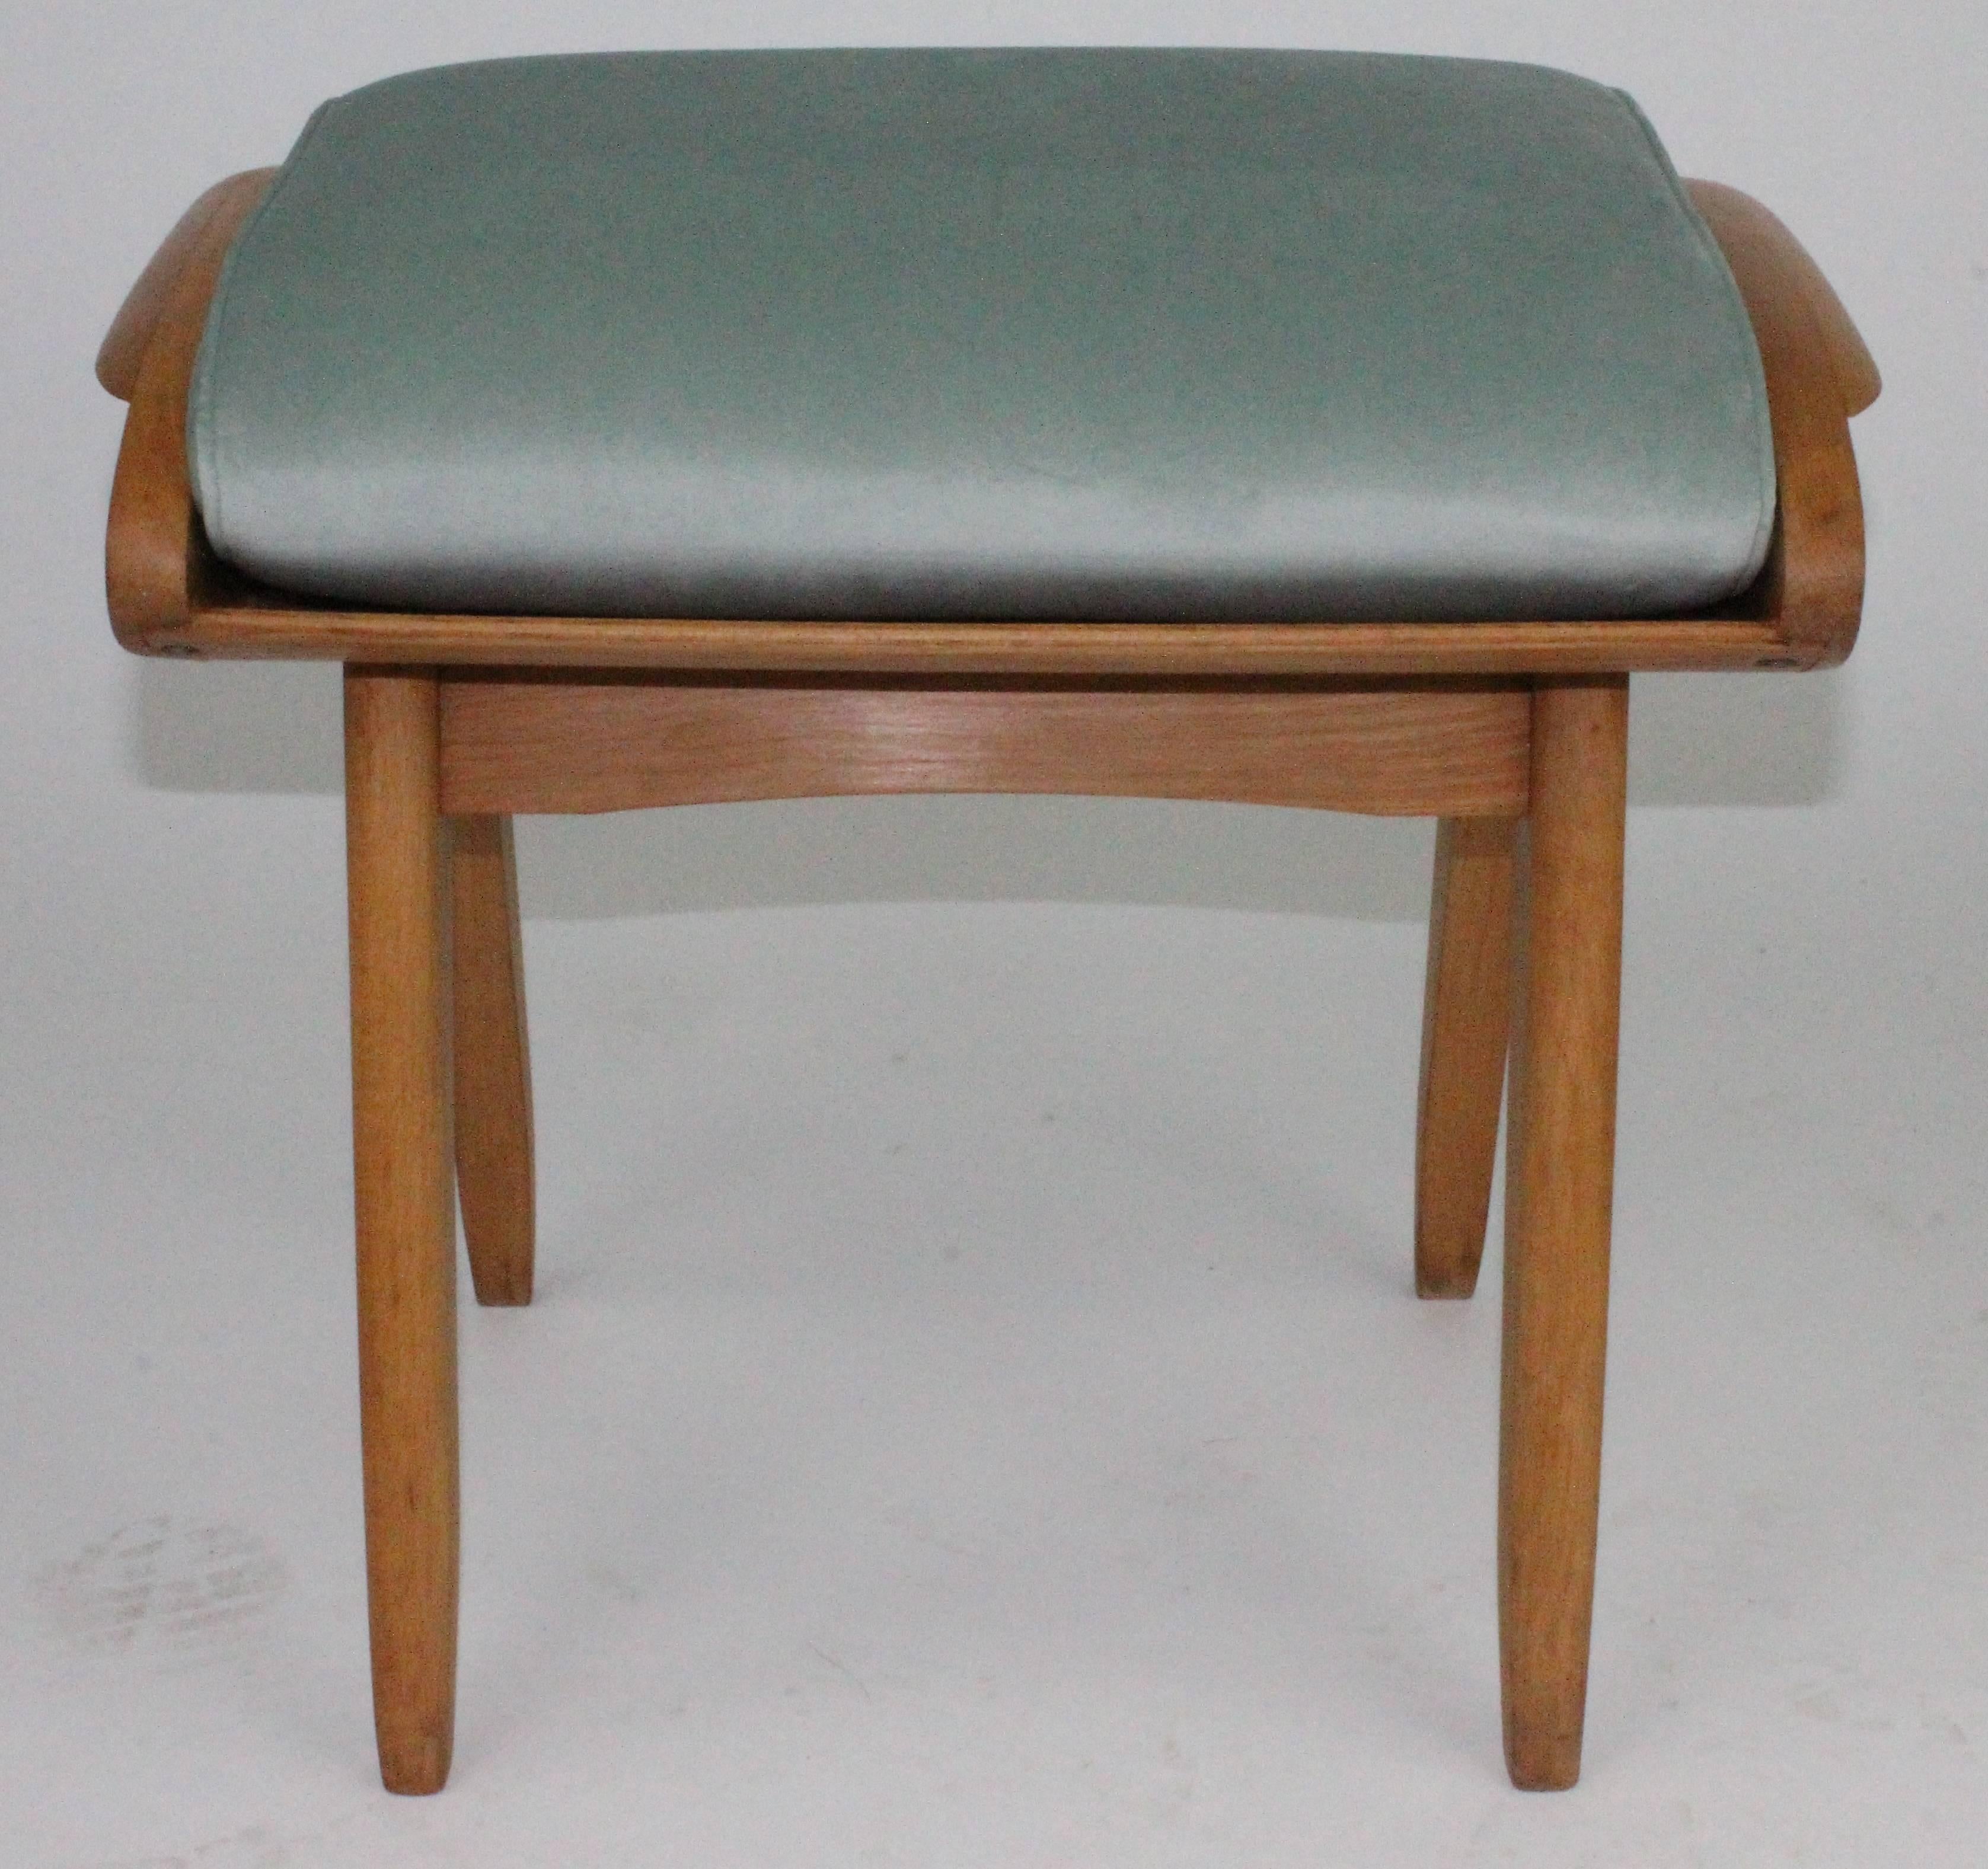 Svante Skogh Chair with Stool for Asko Finland, Design 1954 For Sale 7